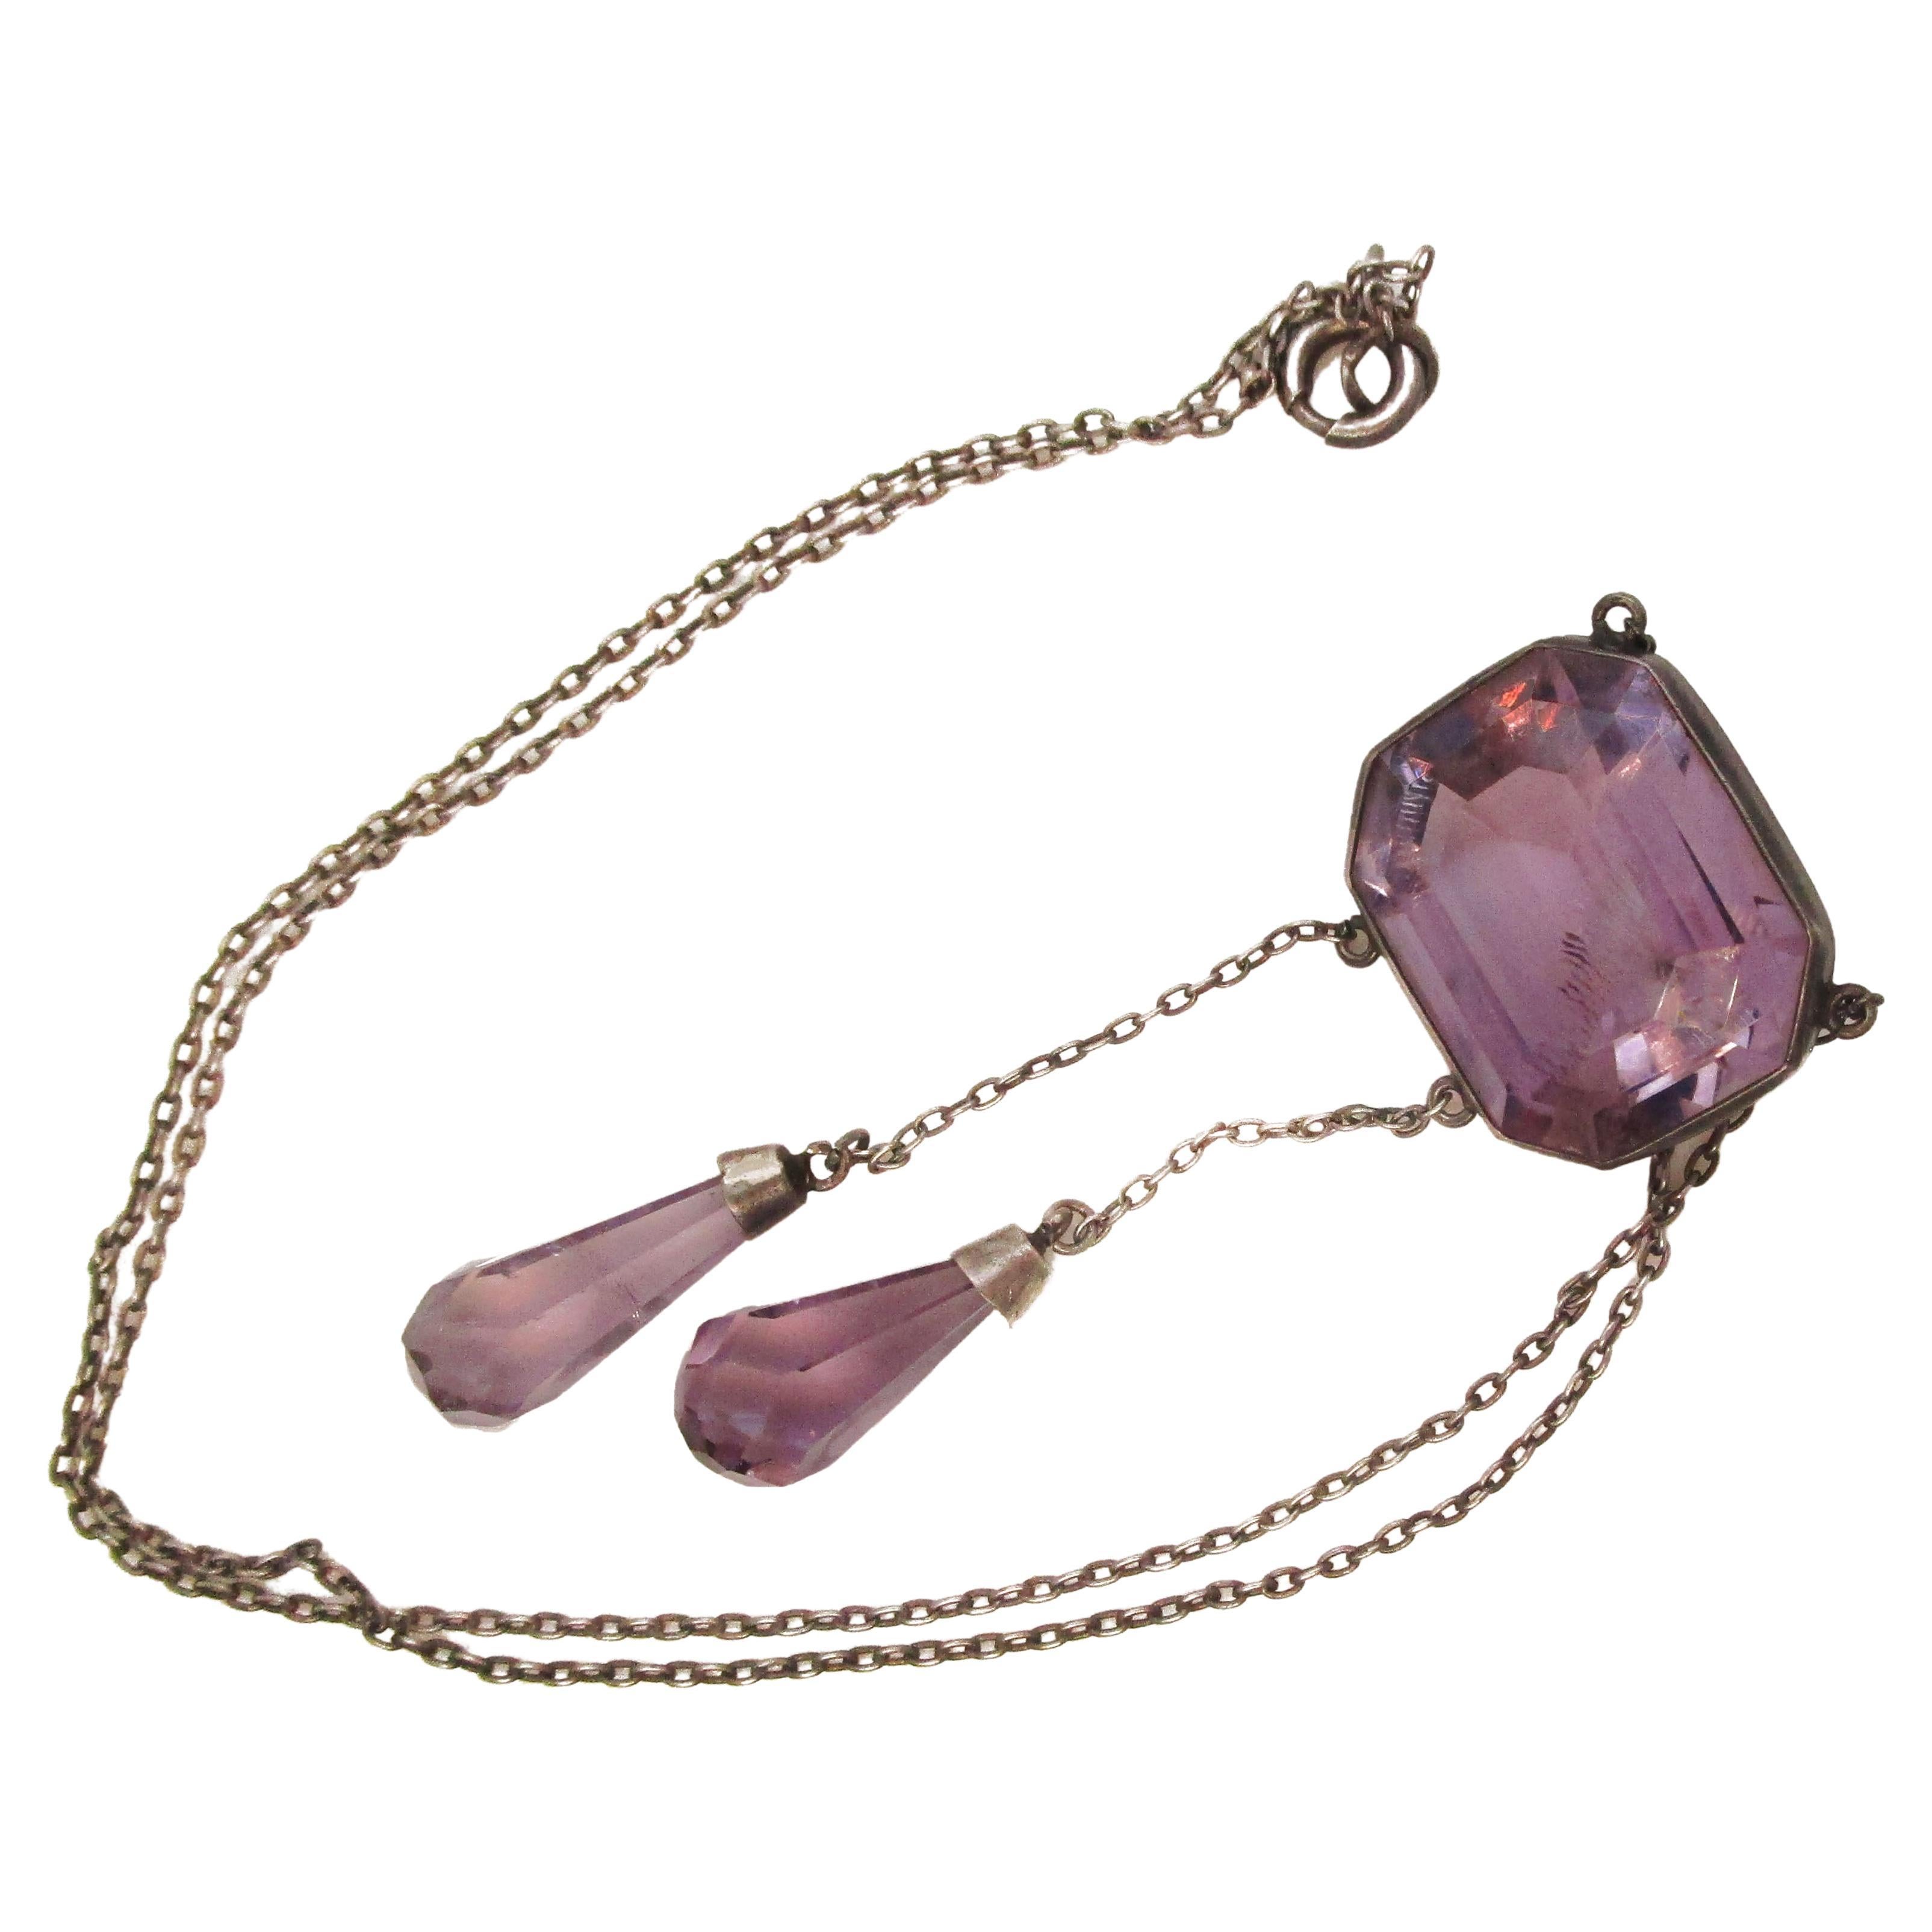 Edwardian Austrian Sterling Silver and Amethyst Negligee Necklace with Briolette